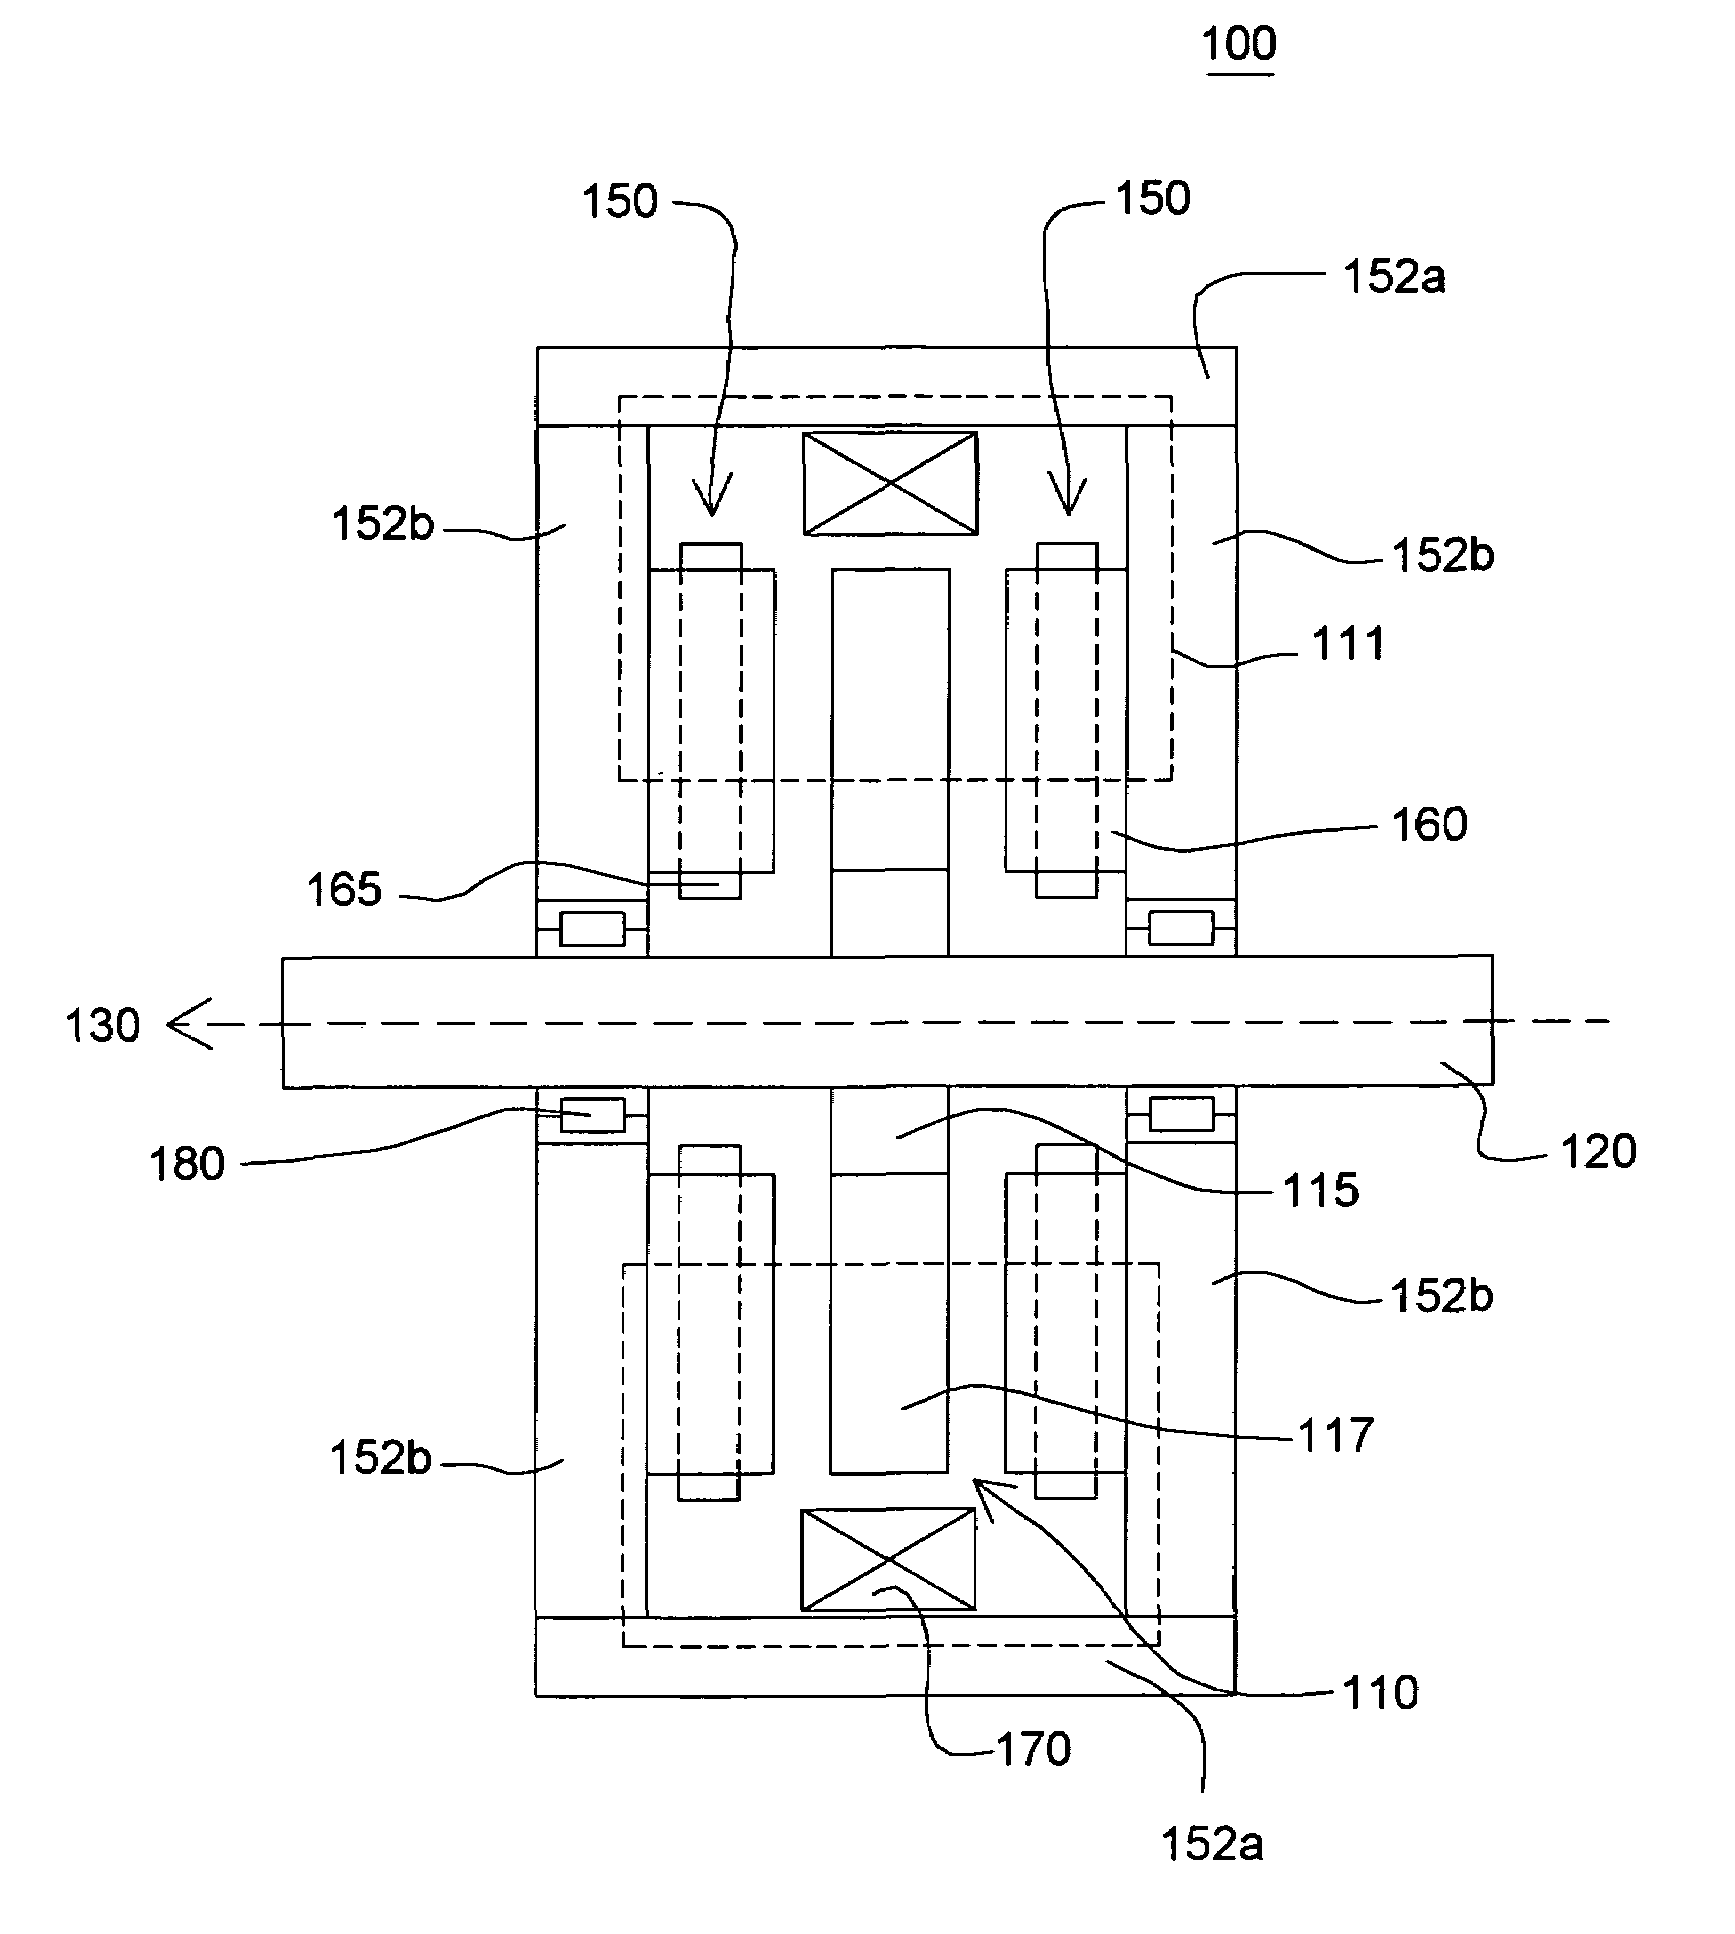 Superconducting rotating machines with stationary field coils